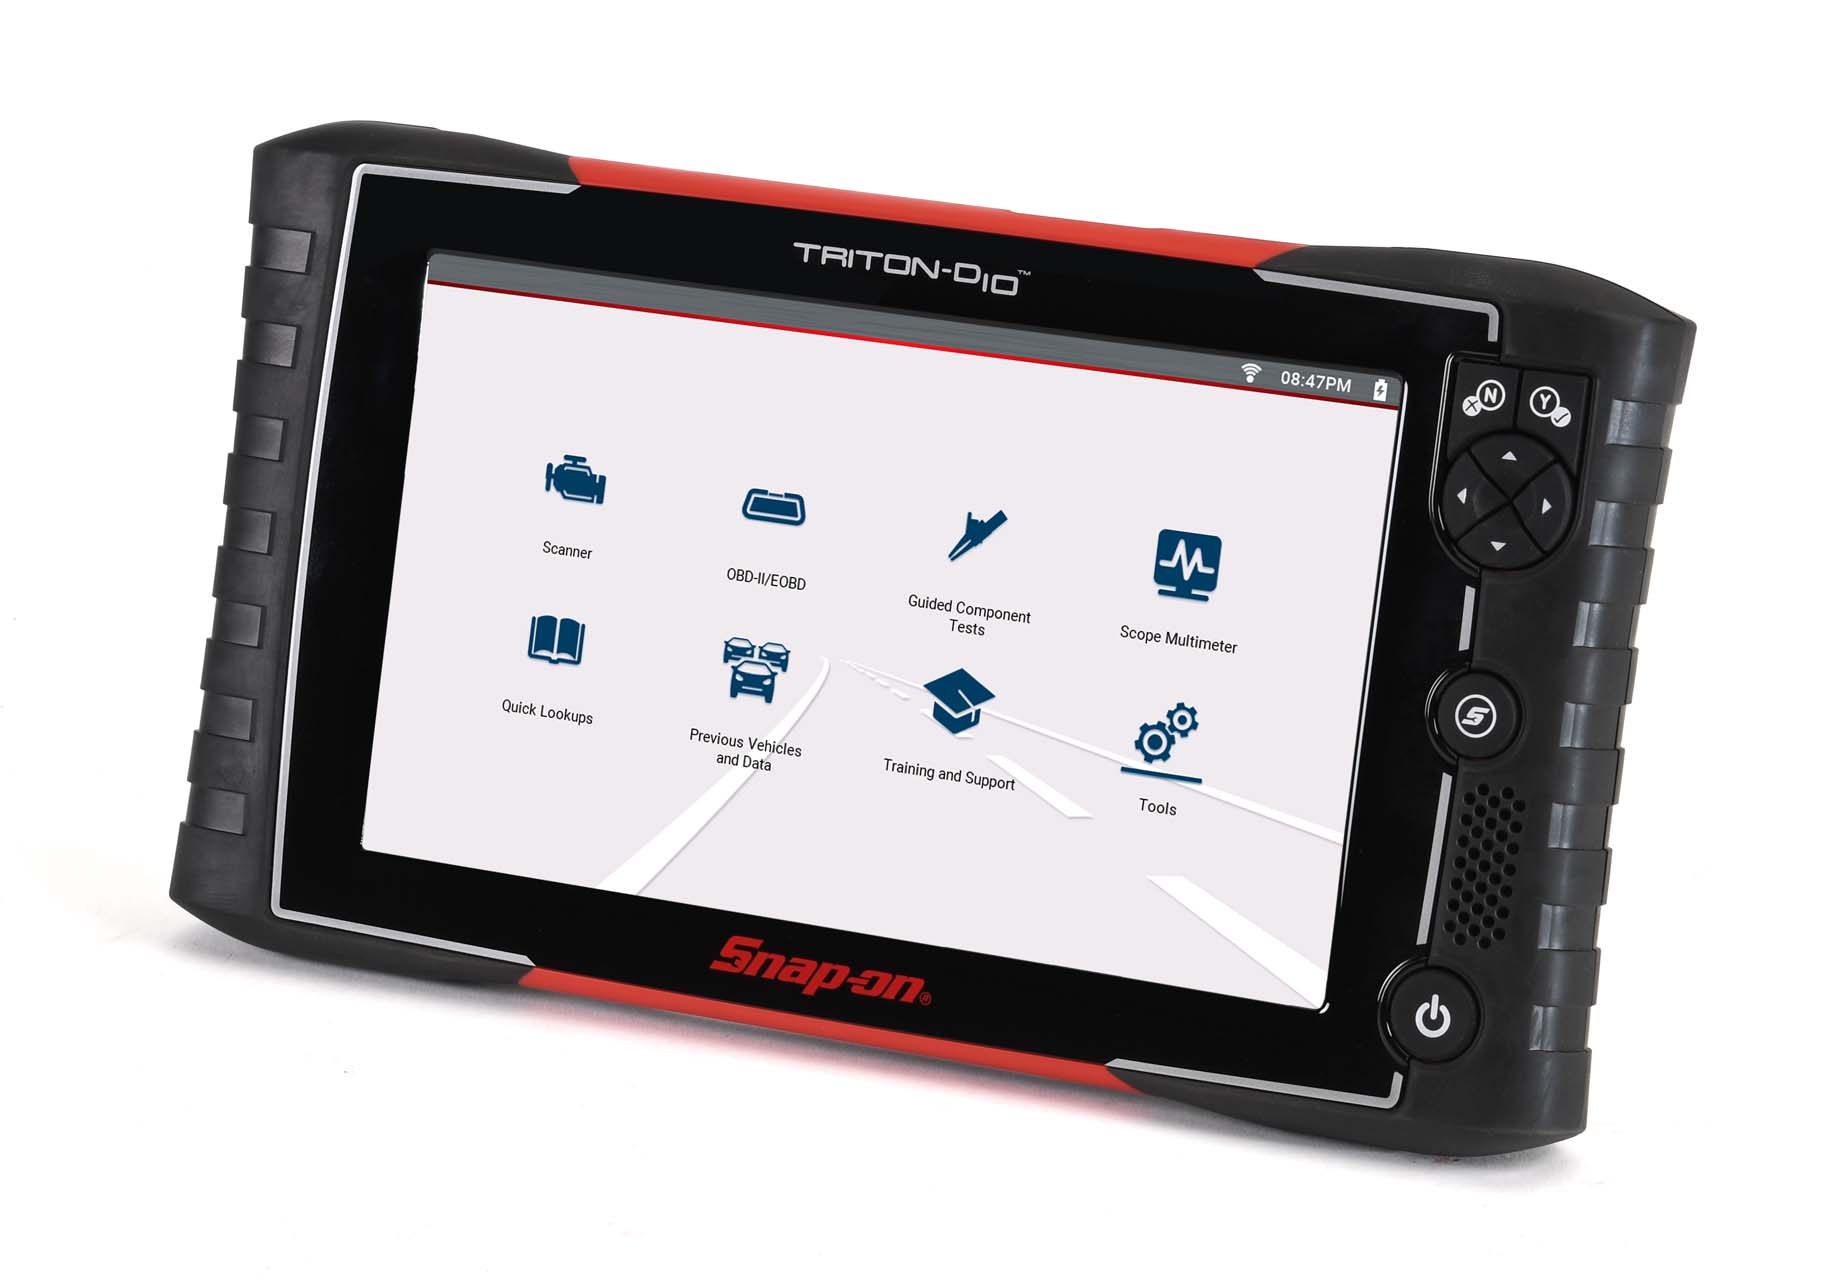 New Snap-on TRITON-D10 Integrated Diagnostic System